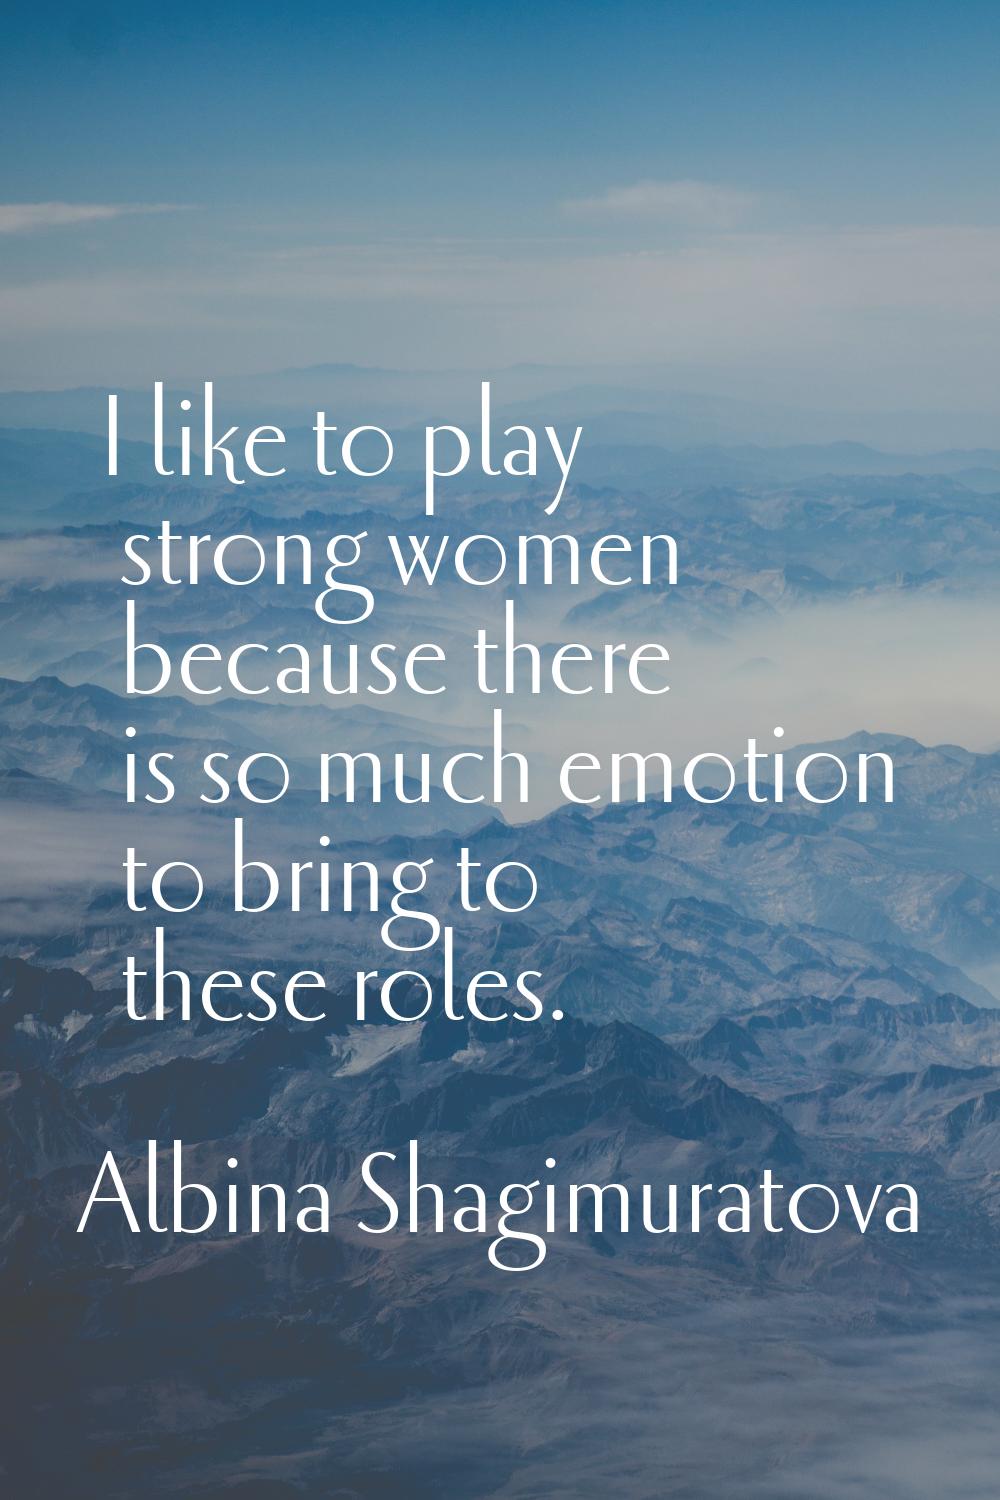 I like to play strong women because there is so much emotion to bring to these roles.